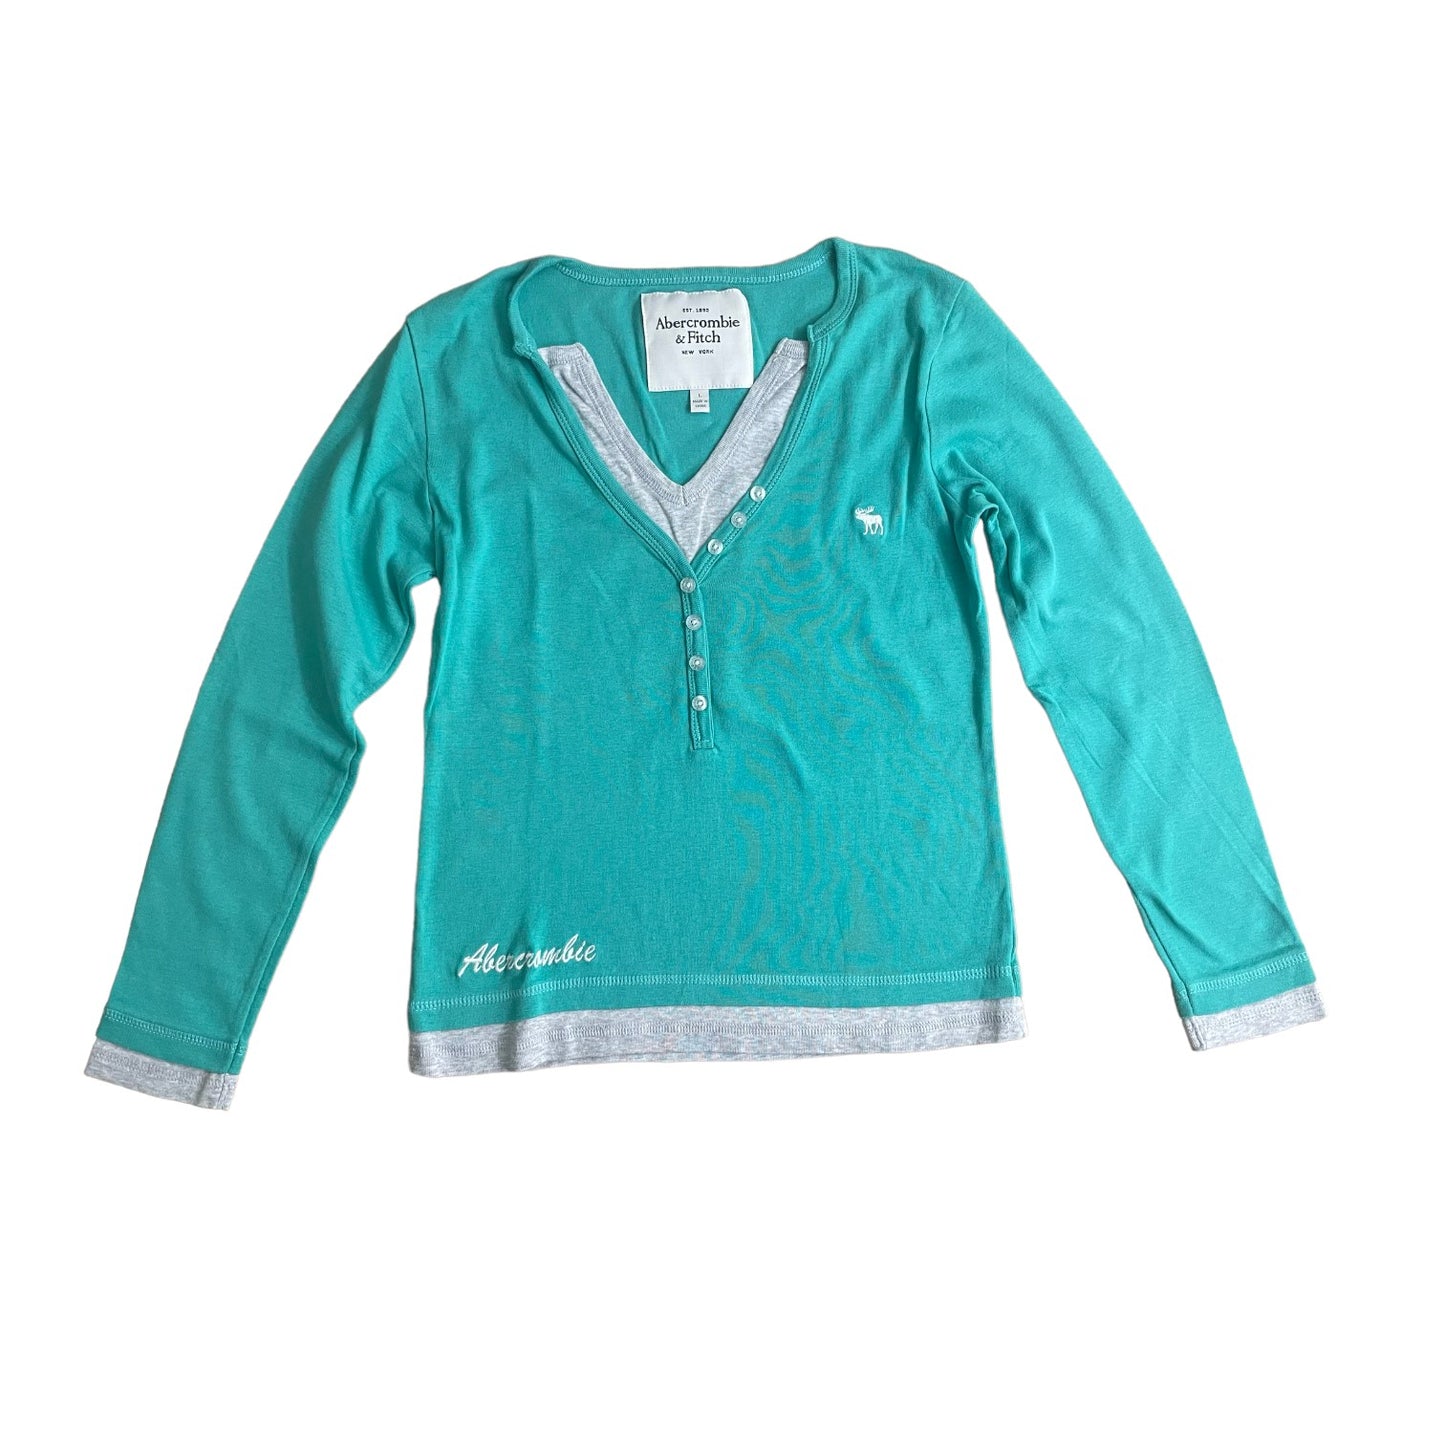 Abercrombie and Fitch Girls Long Sleeve Knit shirt